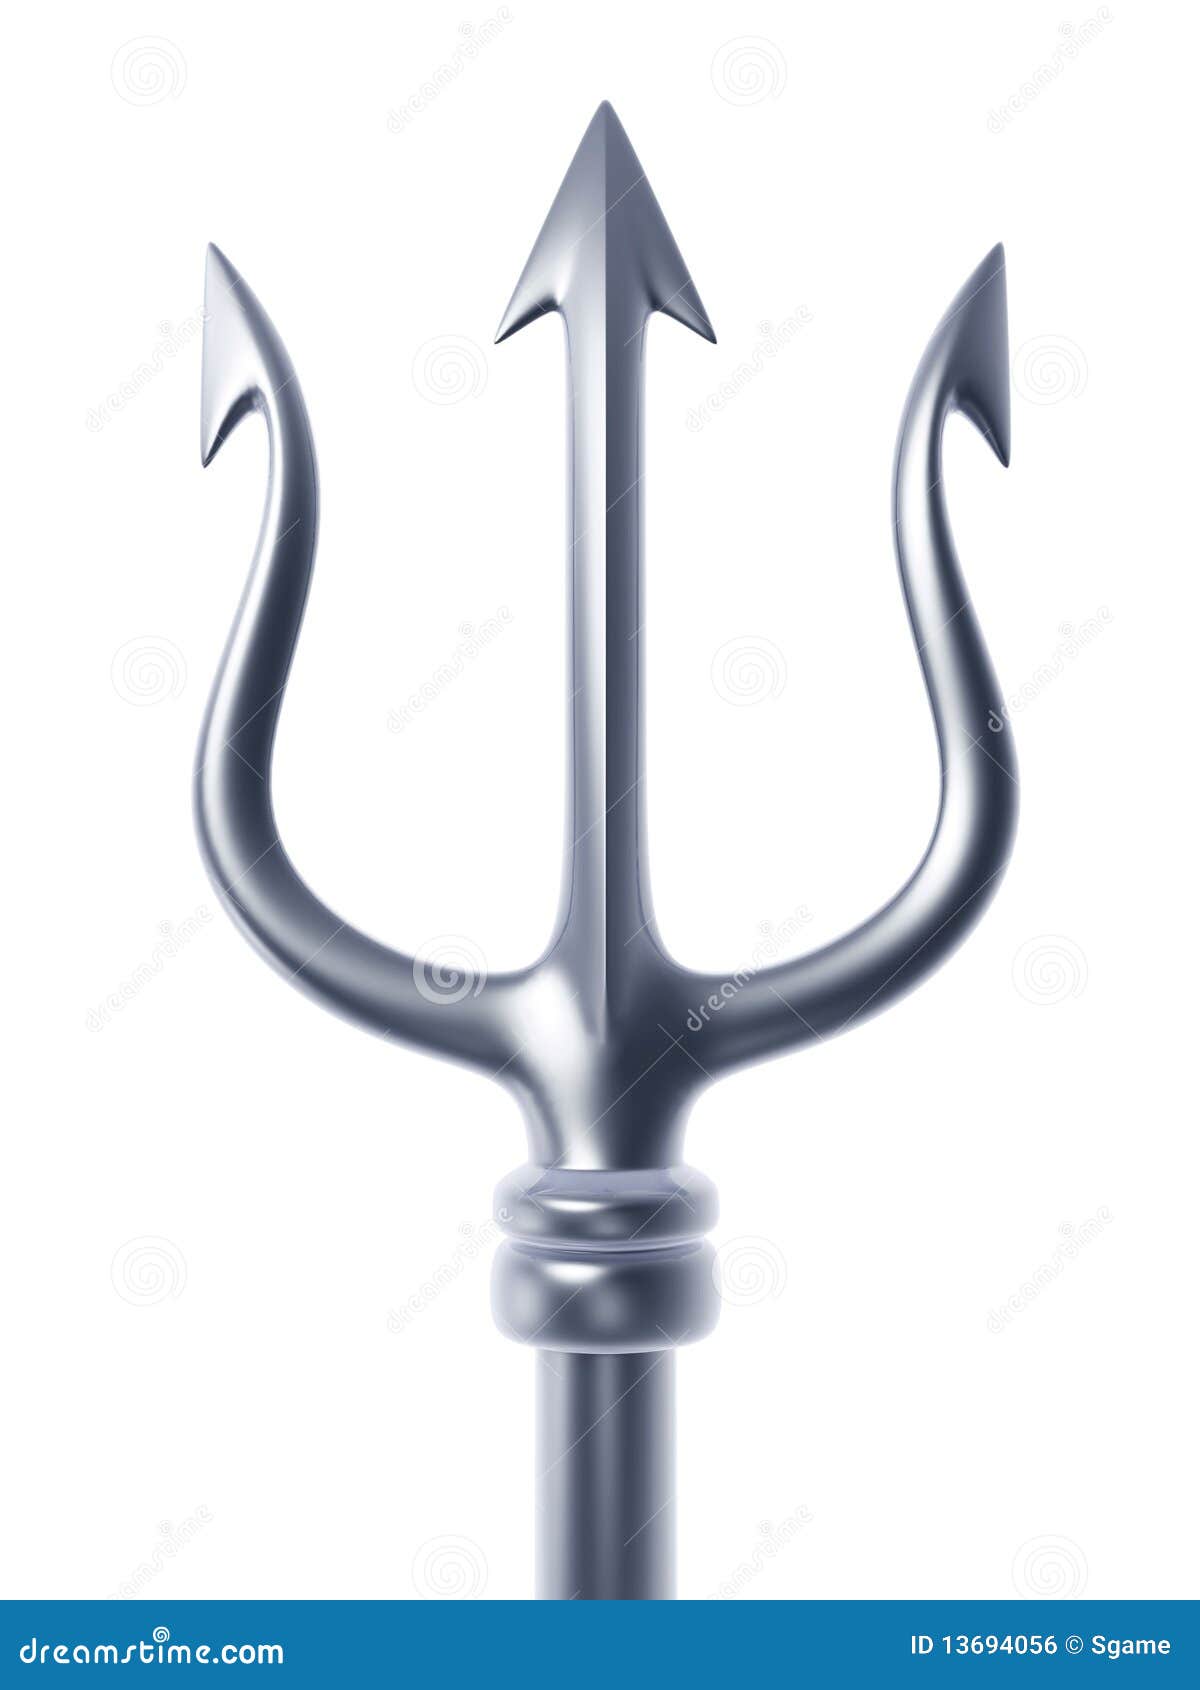 Silver Trident Royalty Free Stock Image - Image: 13694056